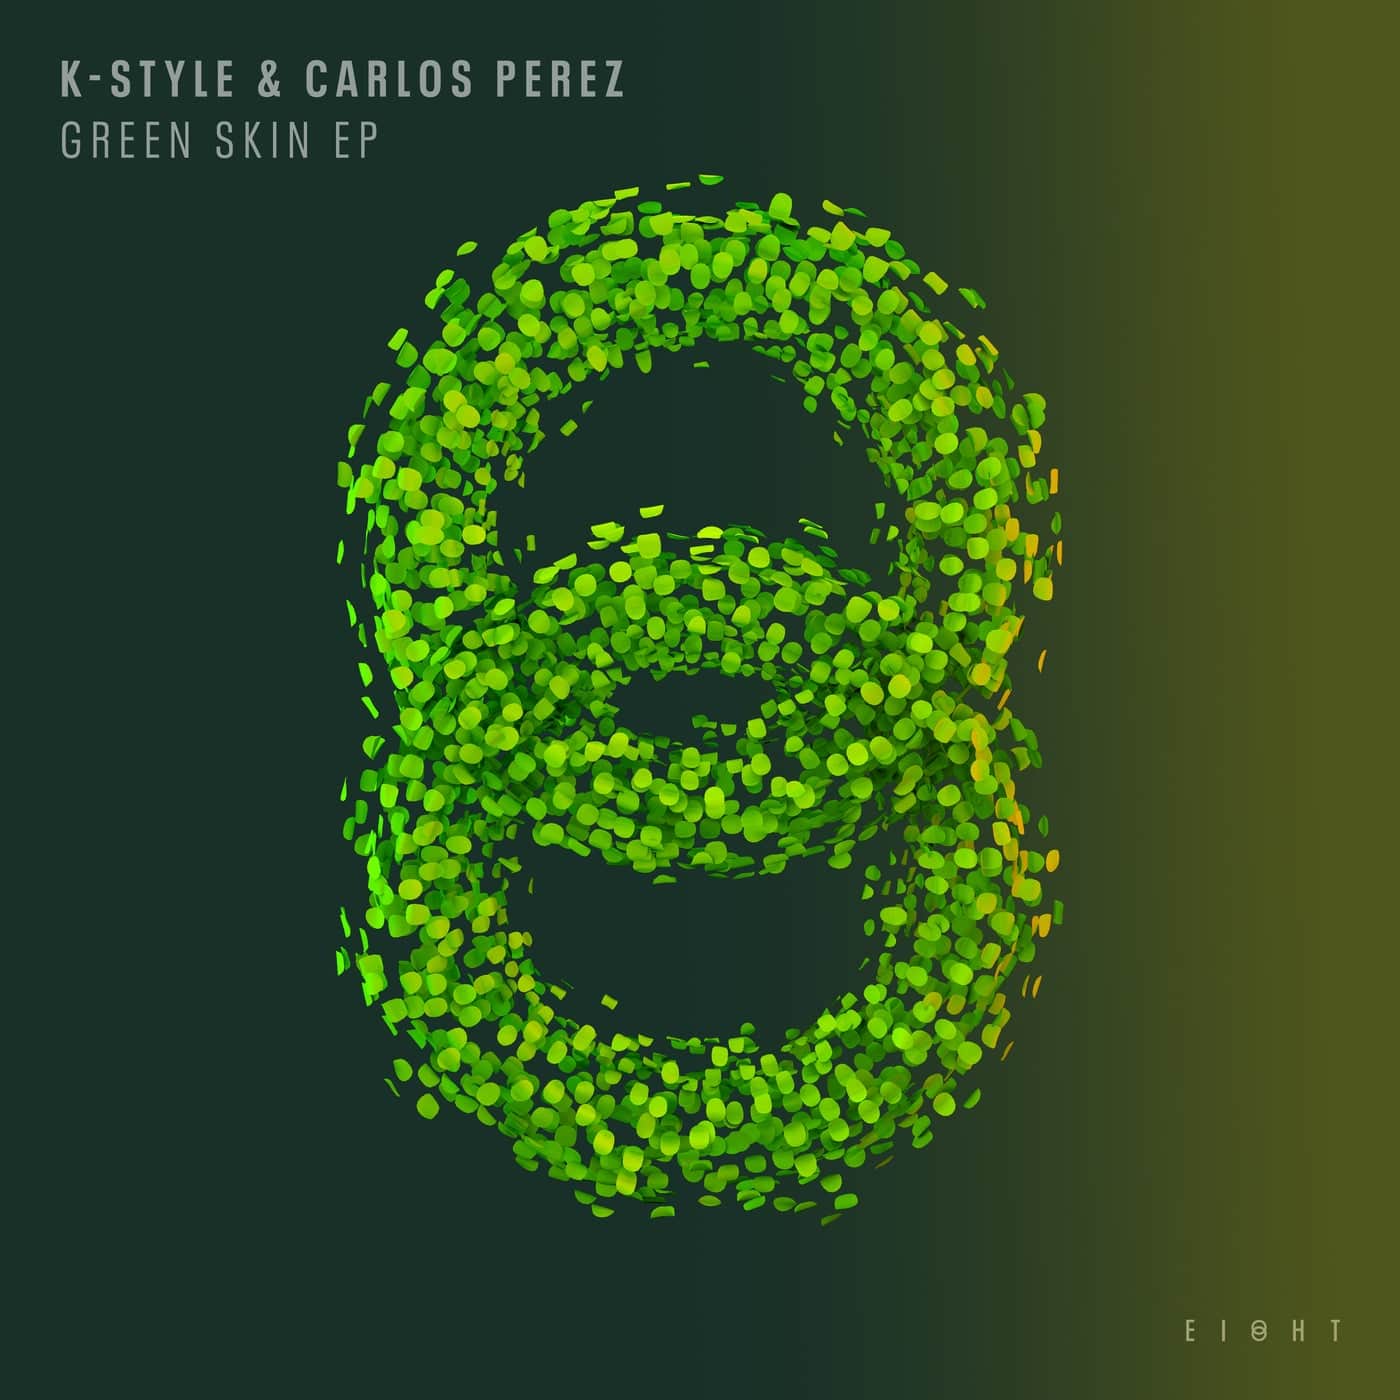 image cover: Carlos Perez, K-Style - Green Skin EP on EI8HT